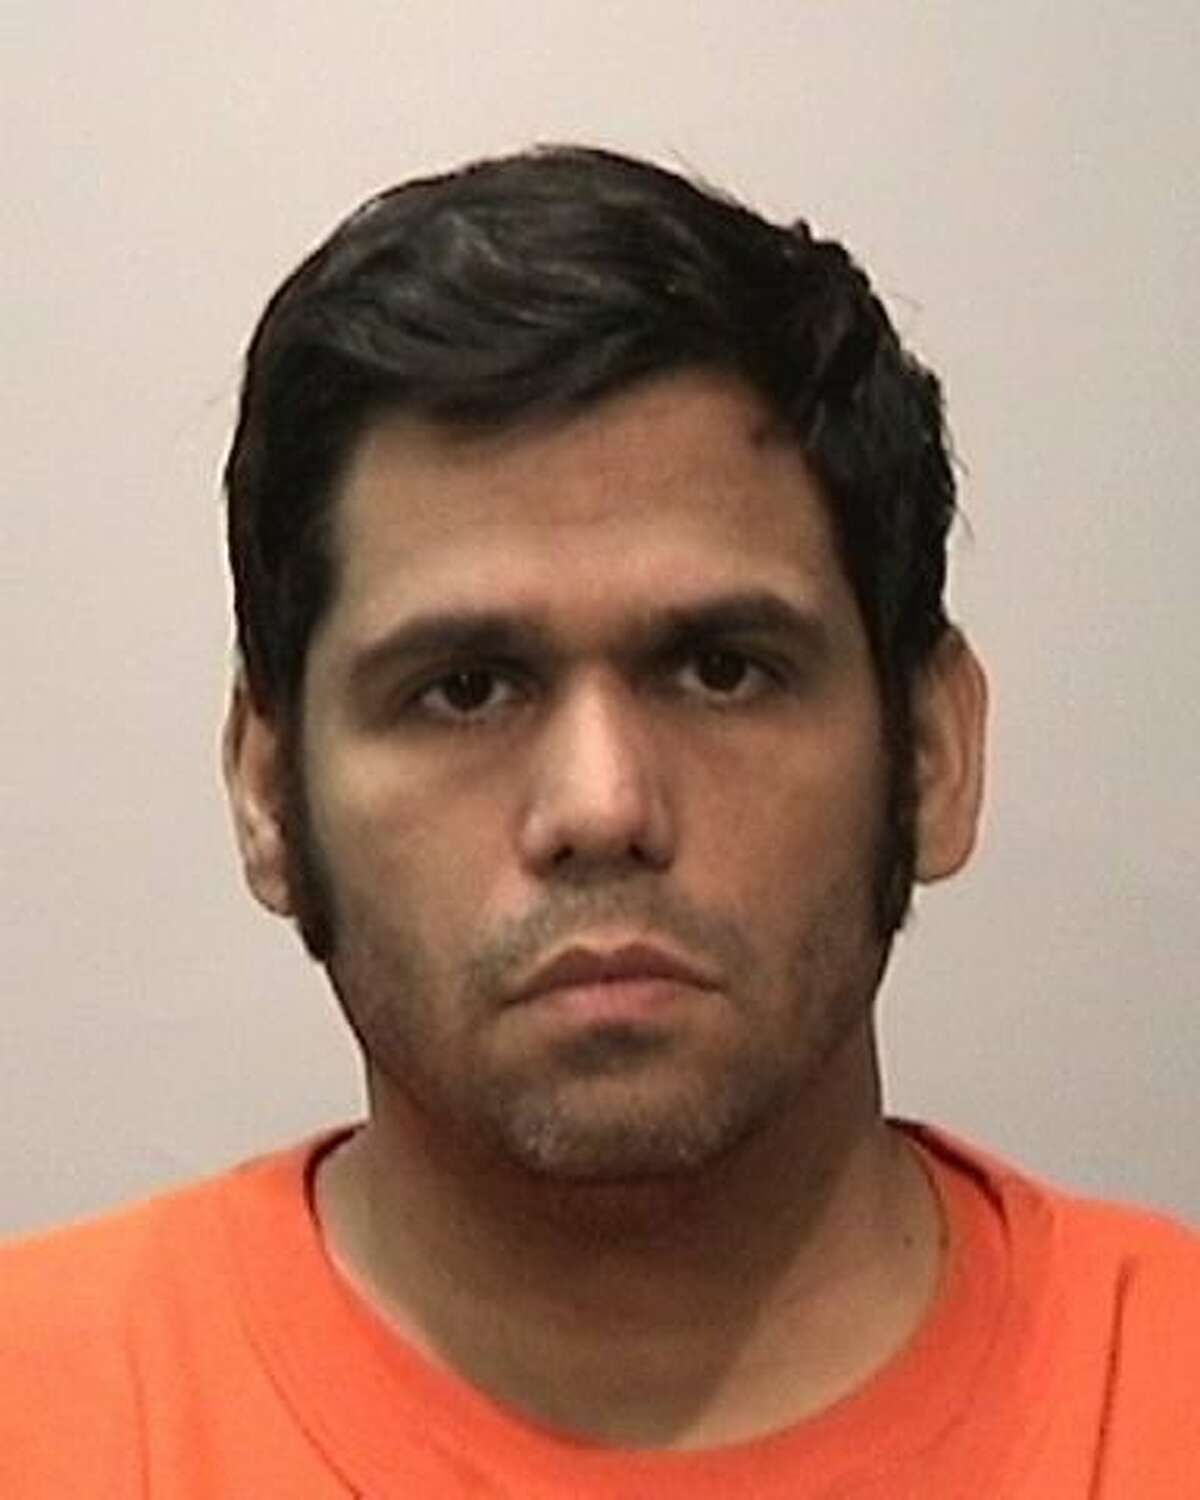 San Francisco political consultant Enrique Pearce, arrested on child pornography charges on May 7, 2015.